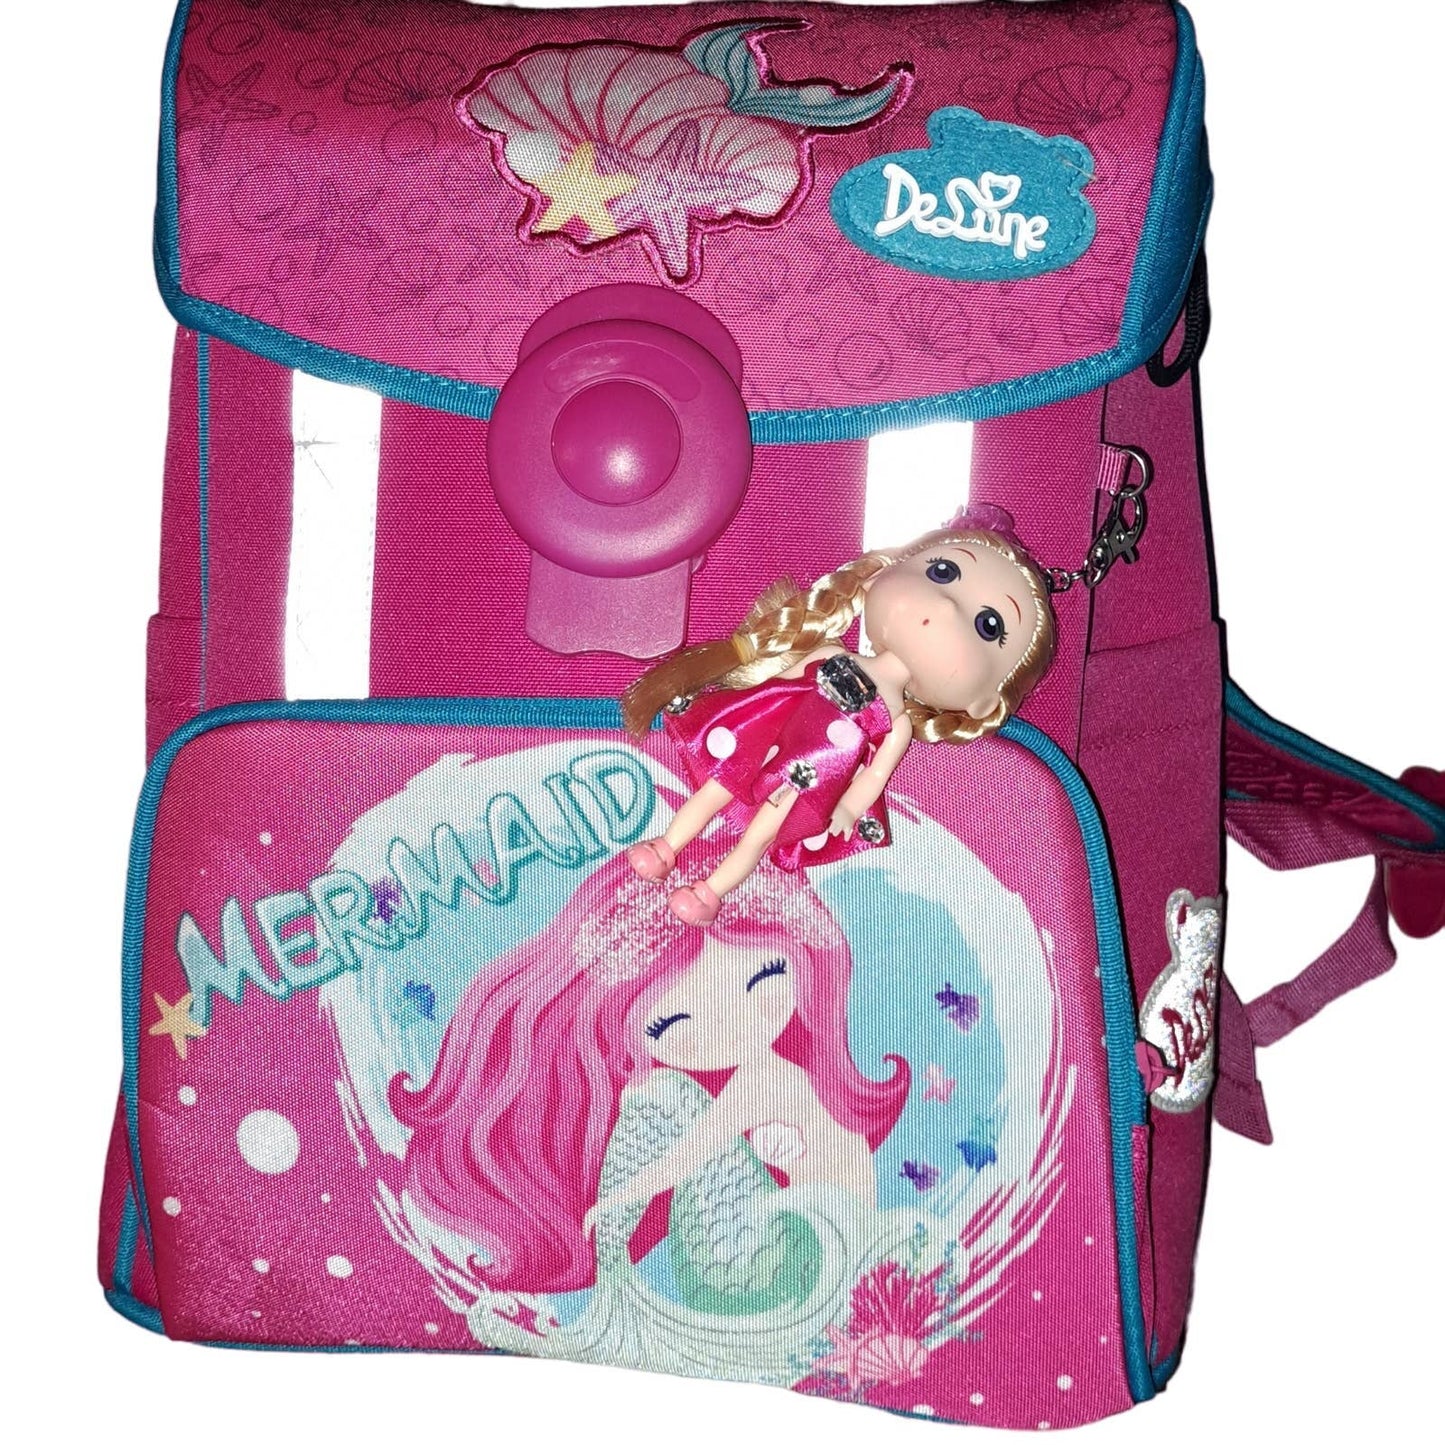 New Delune mermaid backpack spine protect